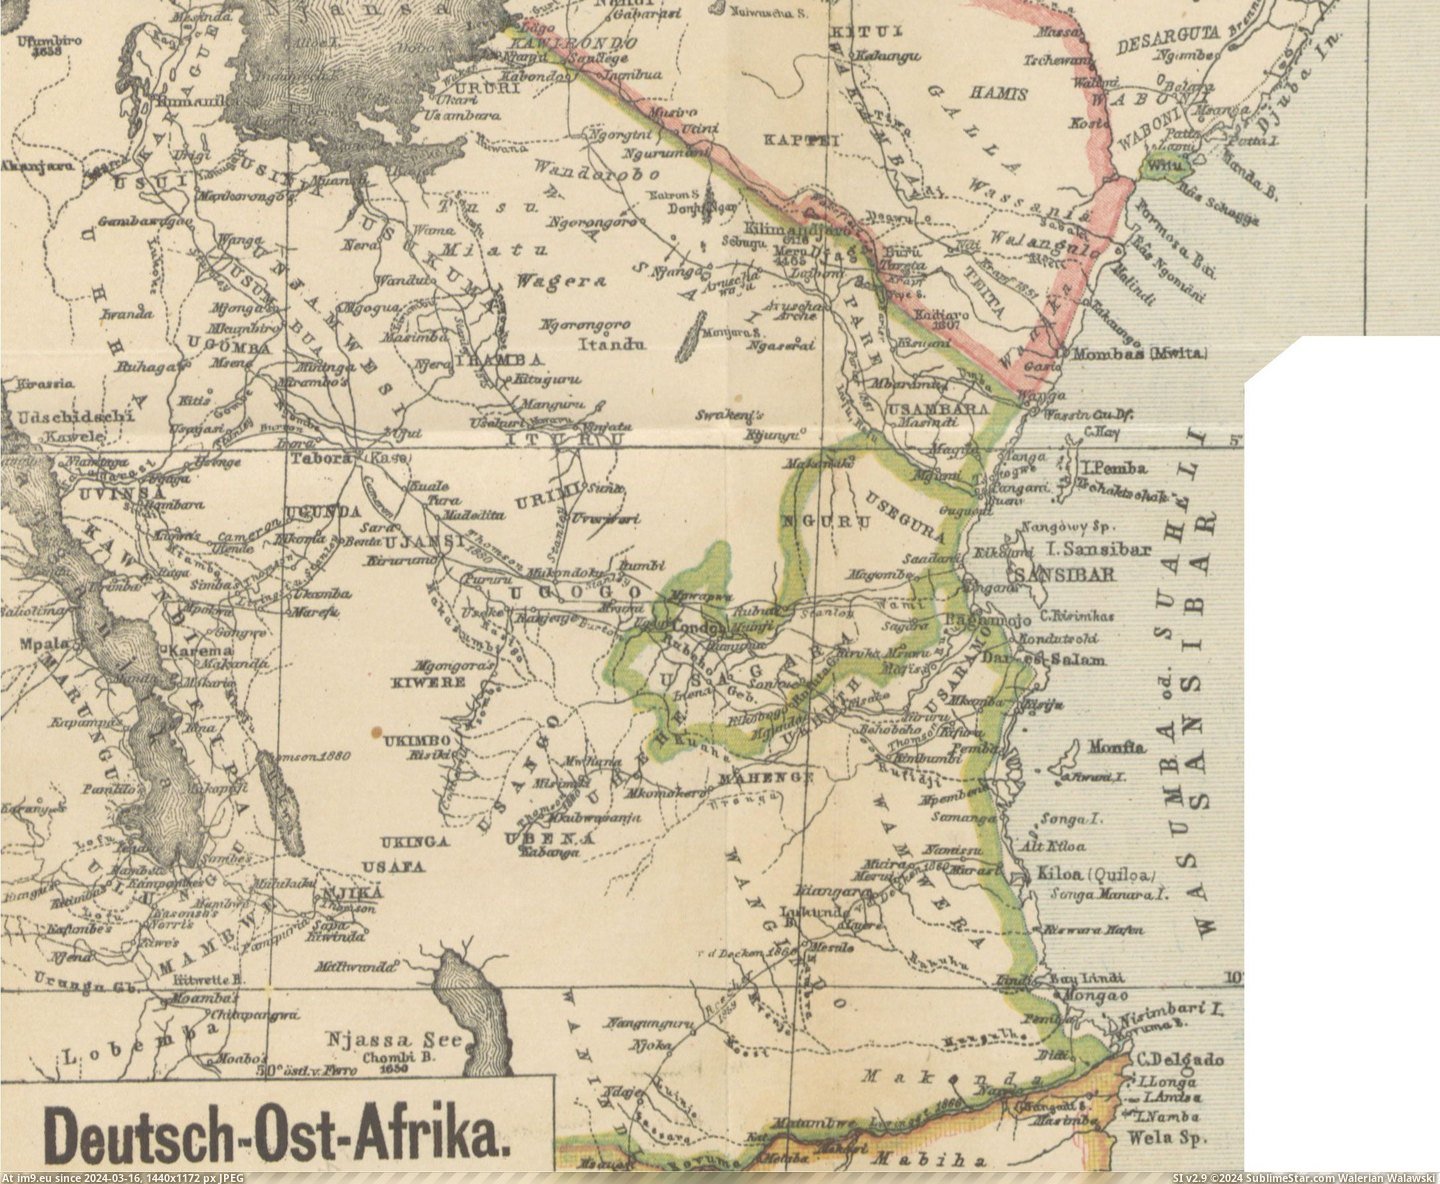 #People #Non #Country #East #Description #Colonies #Germany #Africa #German [Mapporn] German East Africa (Deutsh-Ost-Afrika) from Germany's colonies, Brief description of the country and people of our non Pic. (Изображение из альбом My r/MAPS favs))